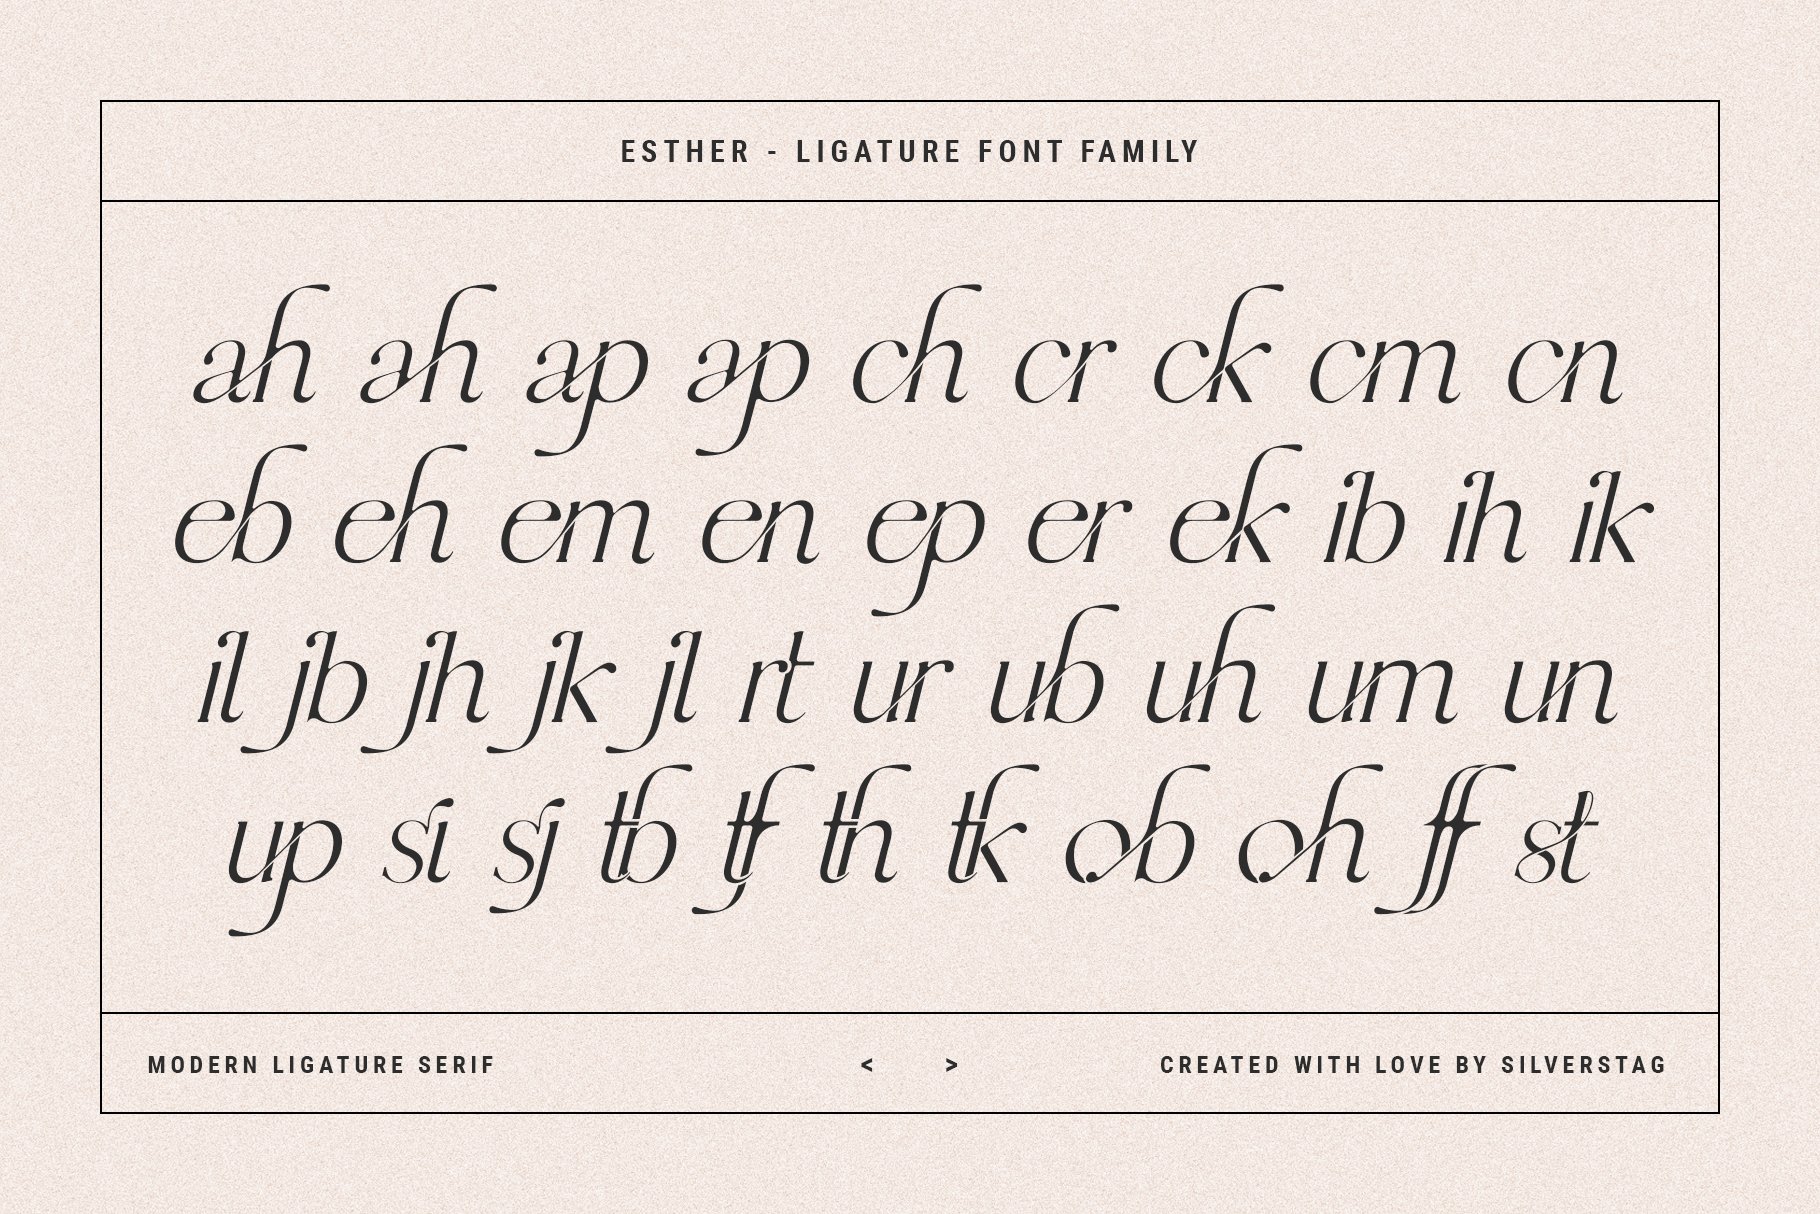 General view of the esther stylish ligature serif font family.